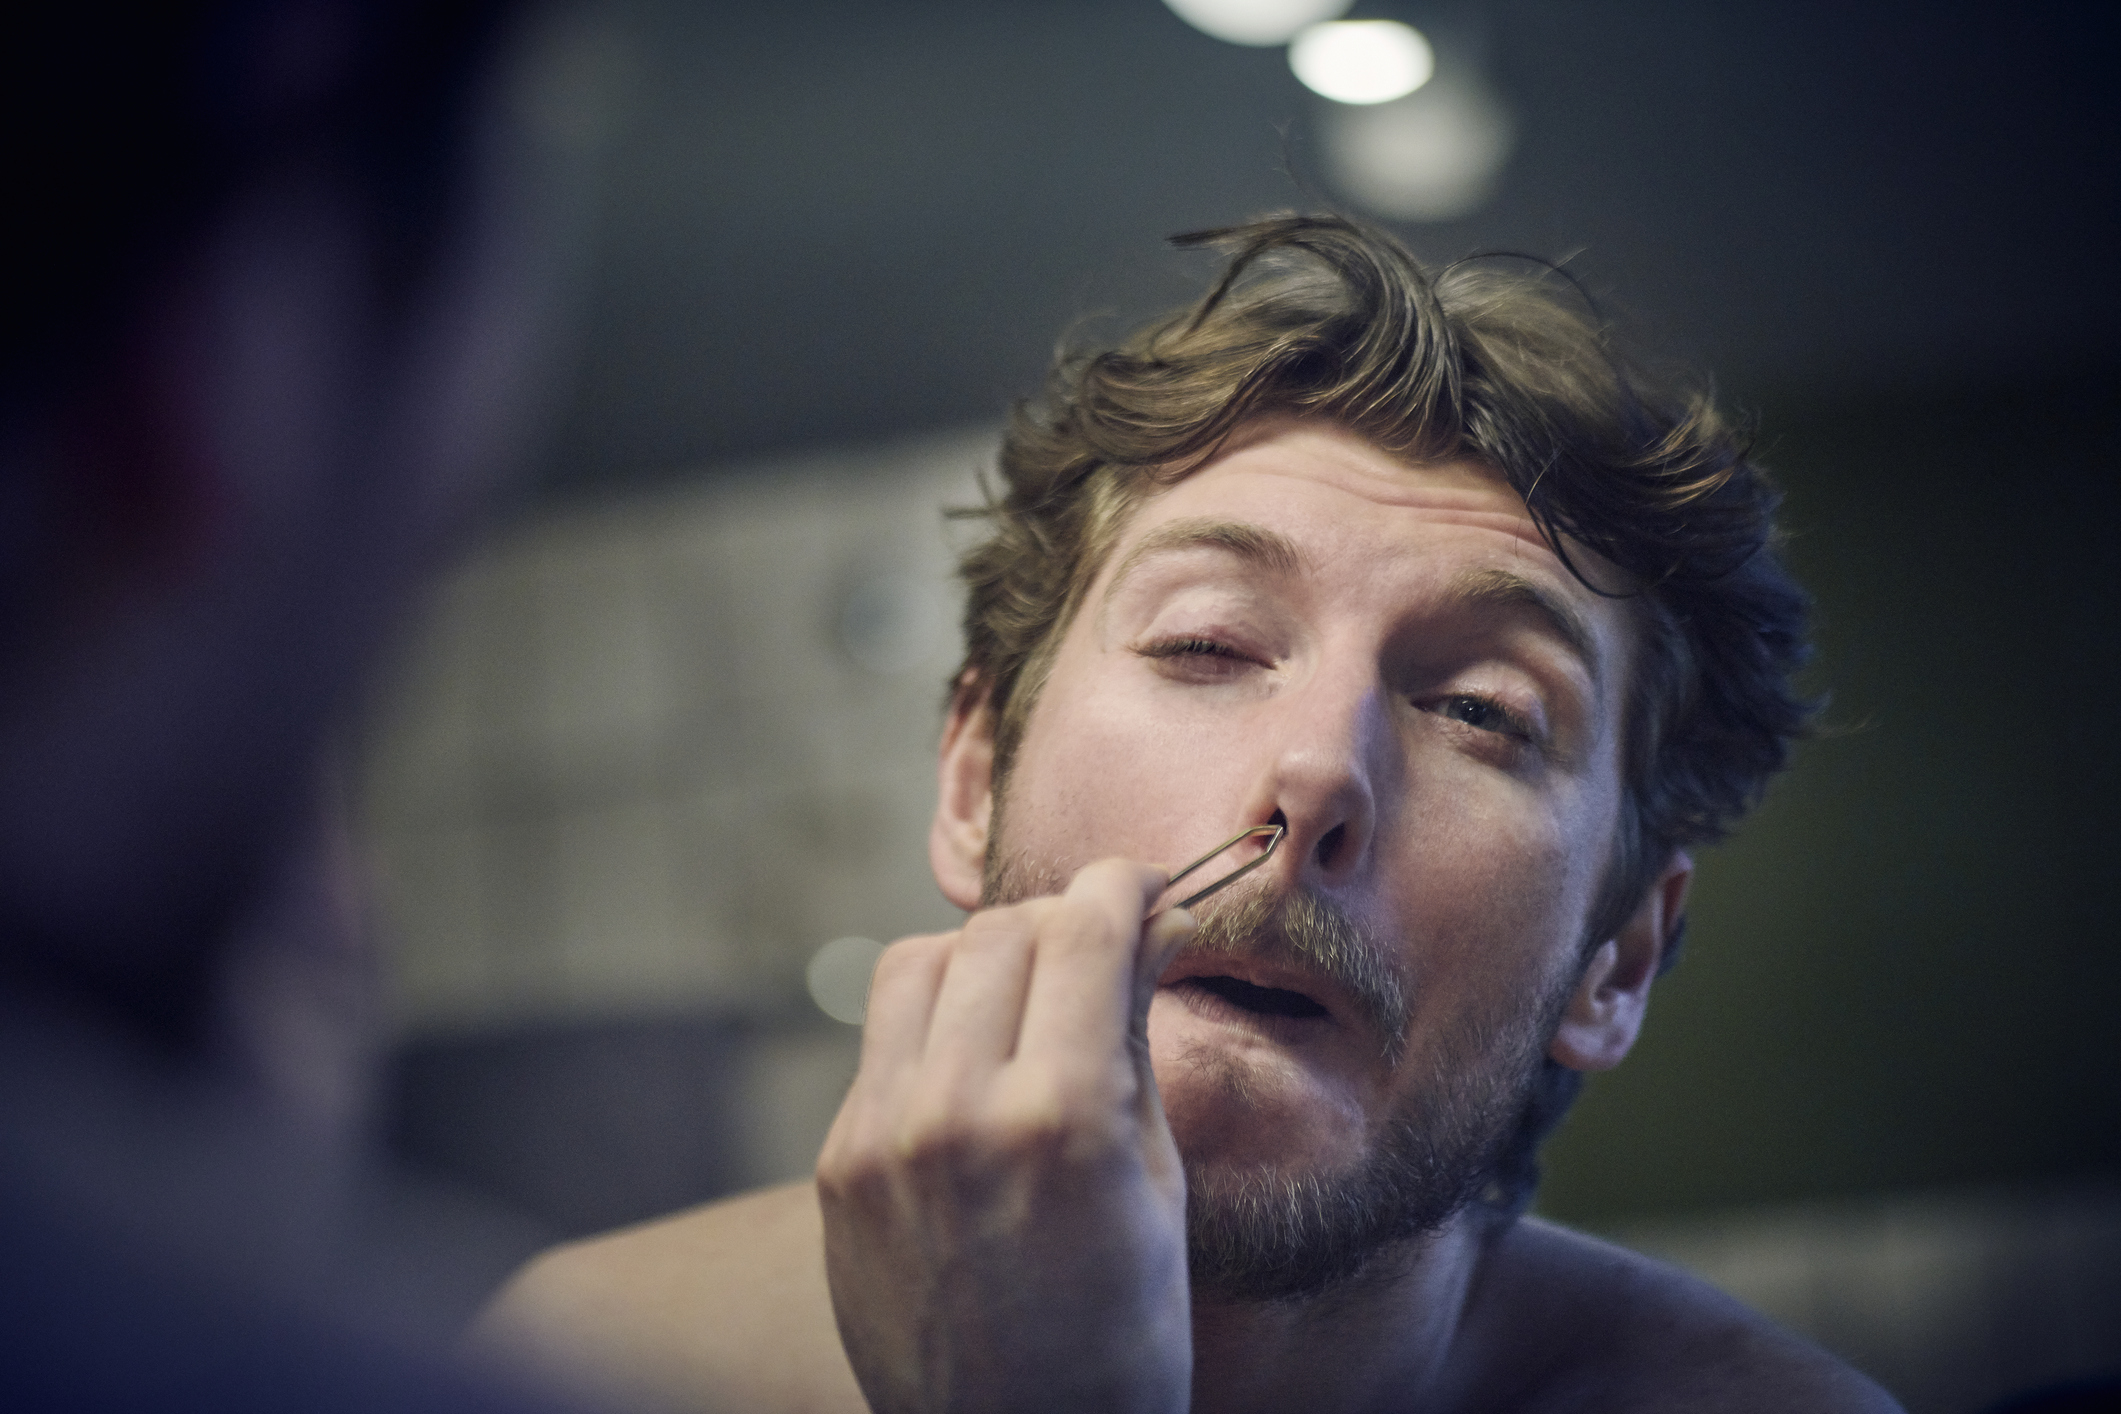 A man is plucking at his nose hairs